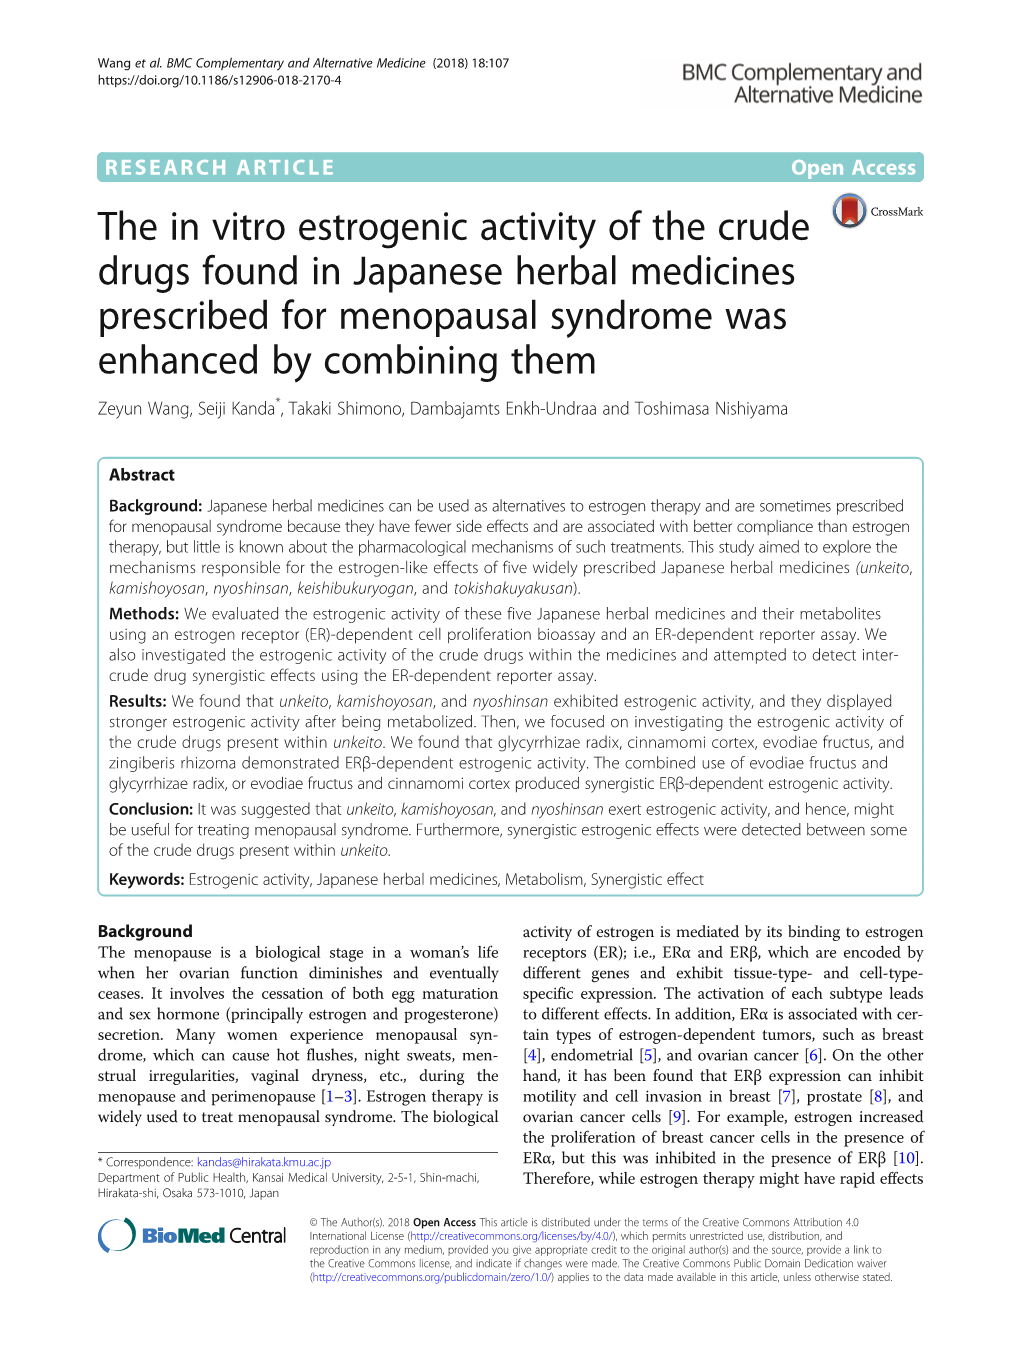 The in Vitro Estrogenic Activity of the Crude Drugs Found in Japanese